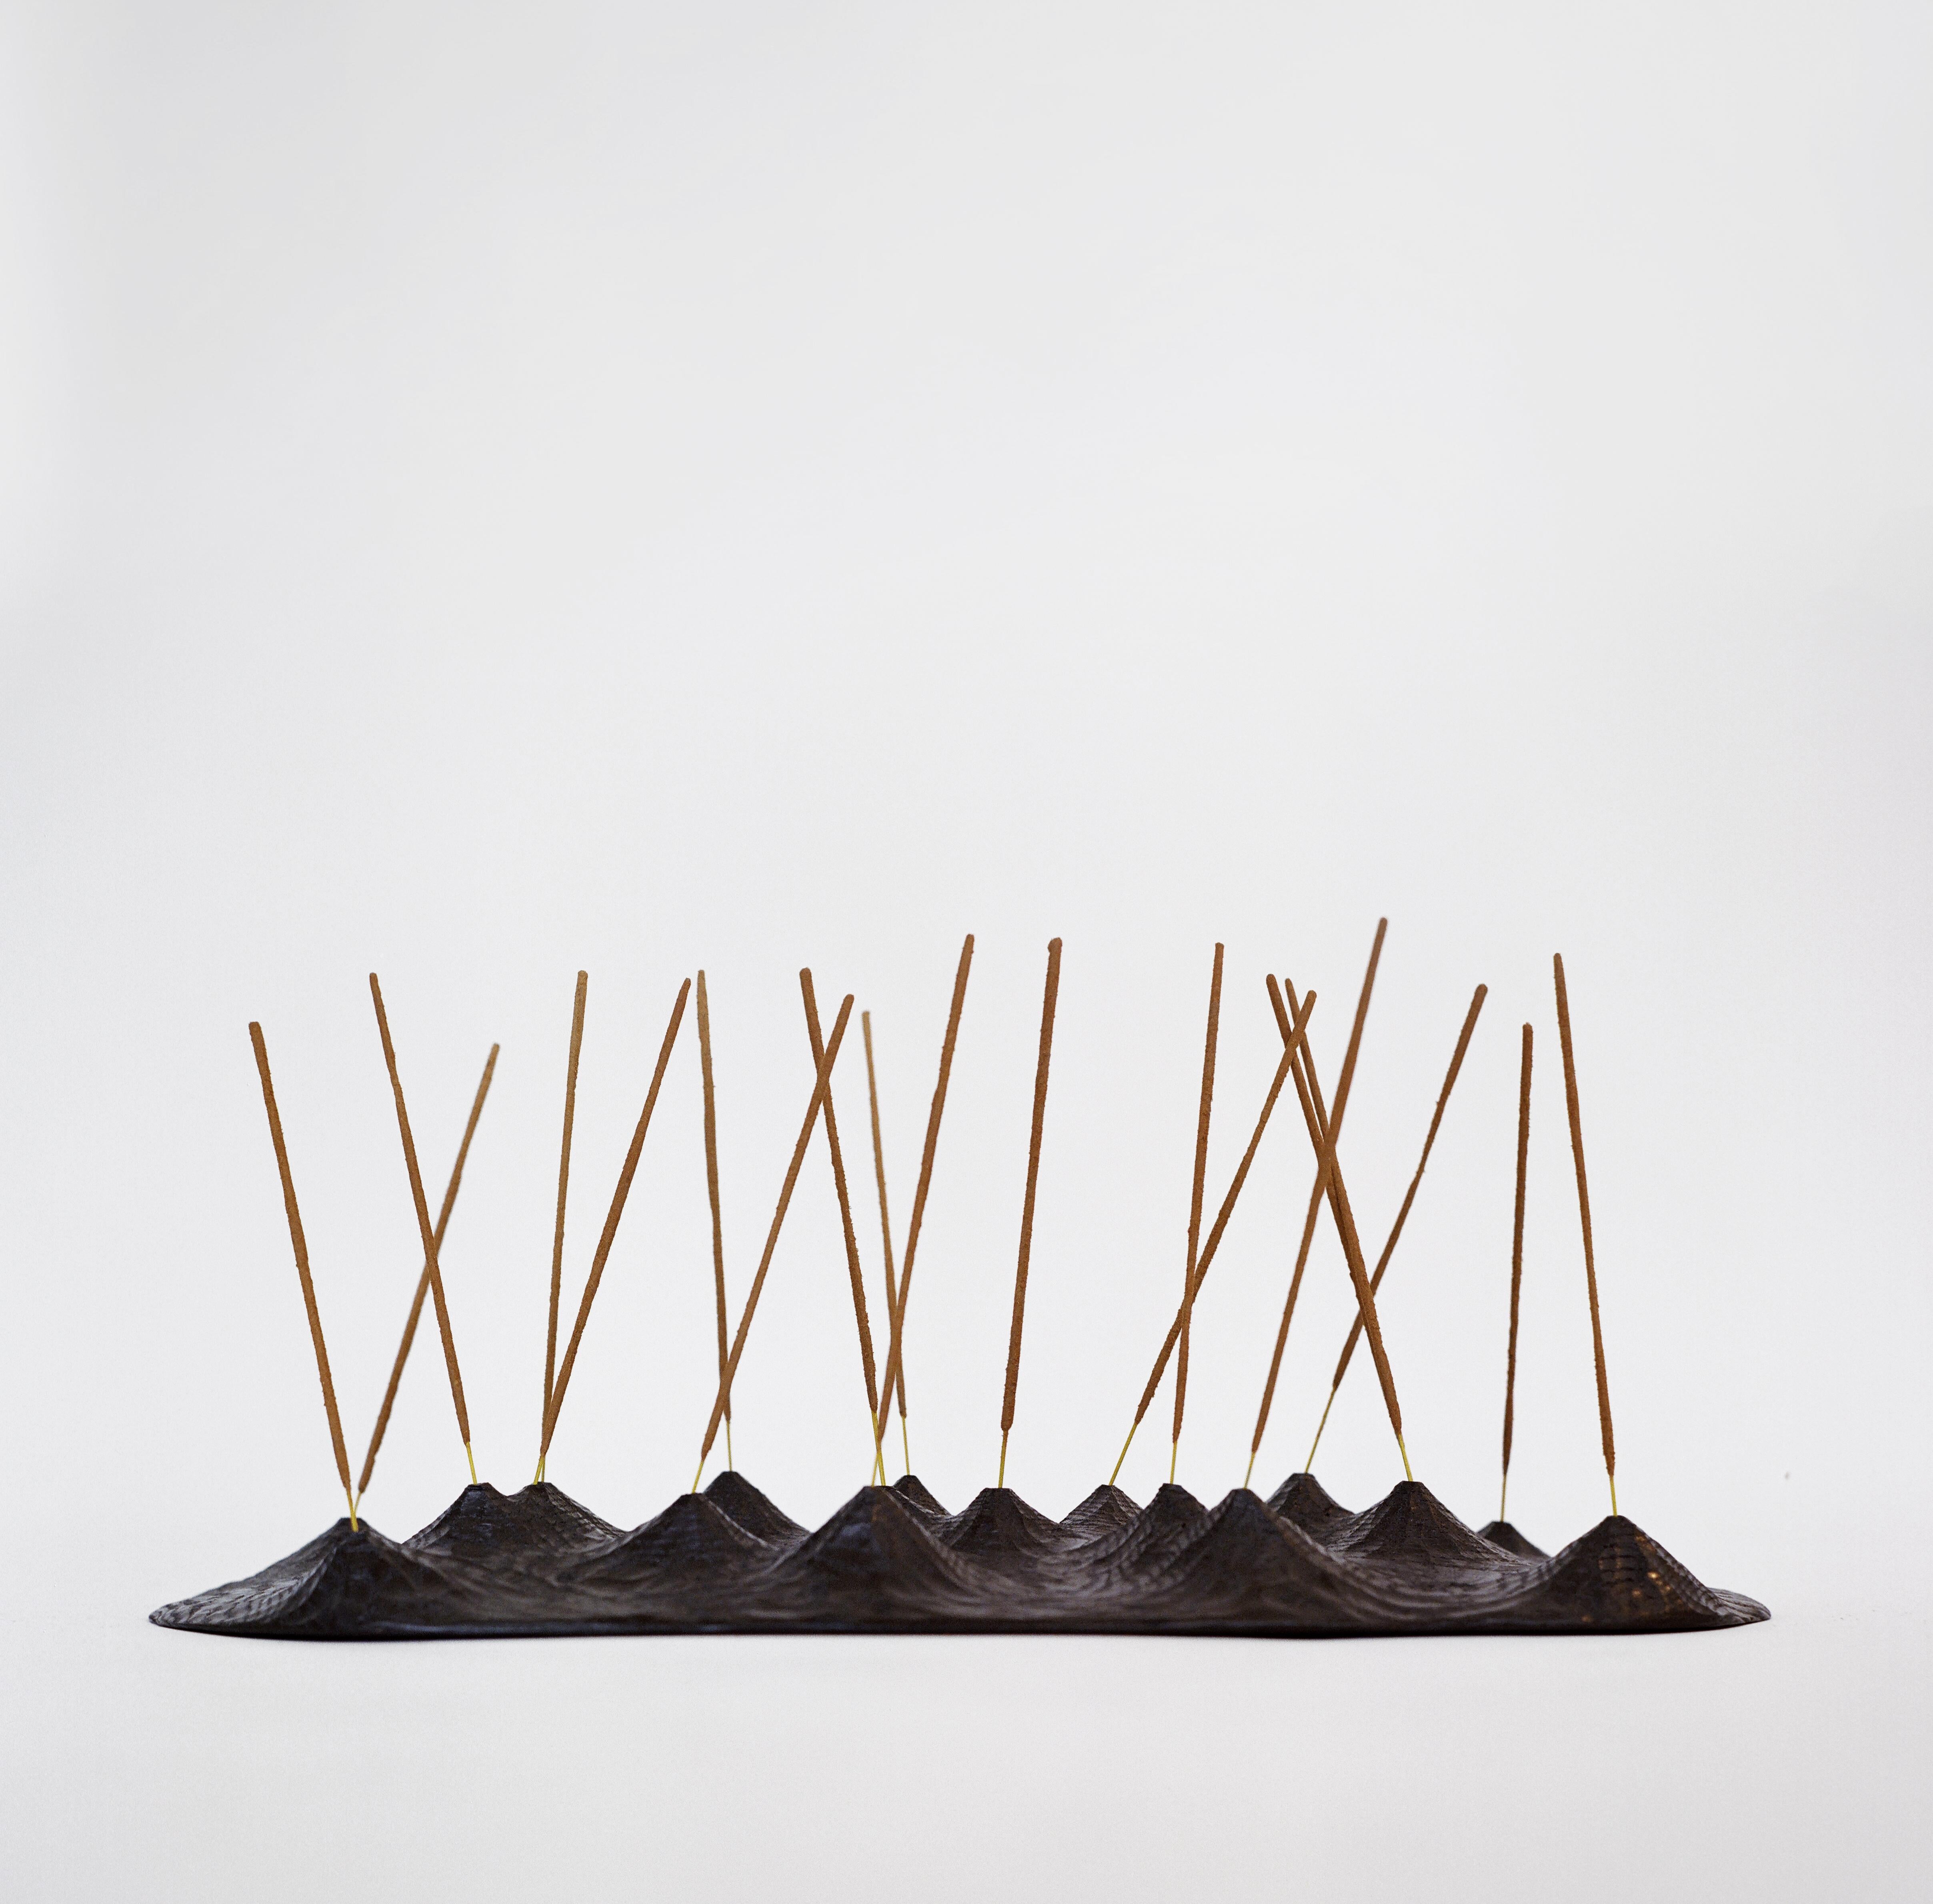 Incense Object by Henry D'ath
Dimensions: D 55 x W 20 x H 6 cm
Materials: Wood.
Available finishes: Black ink. 


Henry d’ath is a New Zealand-born, Hong Kong-based artist and architect. 
Using predominantly salvaged material, the artist routinely